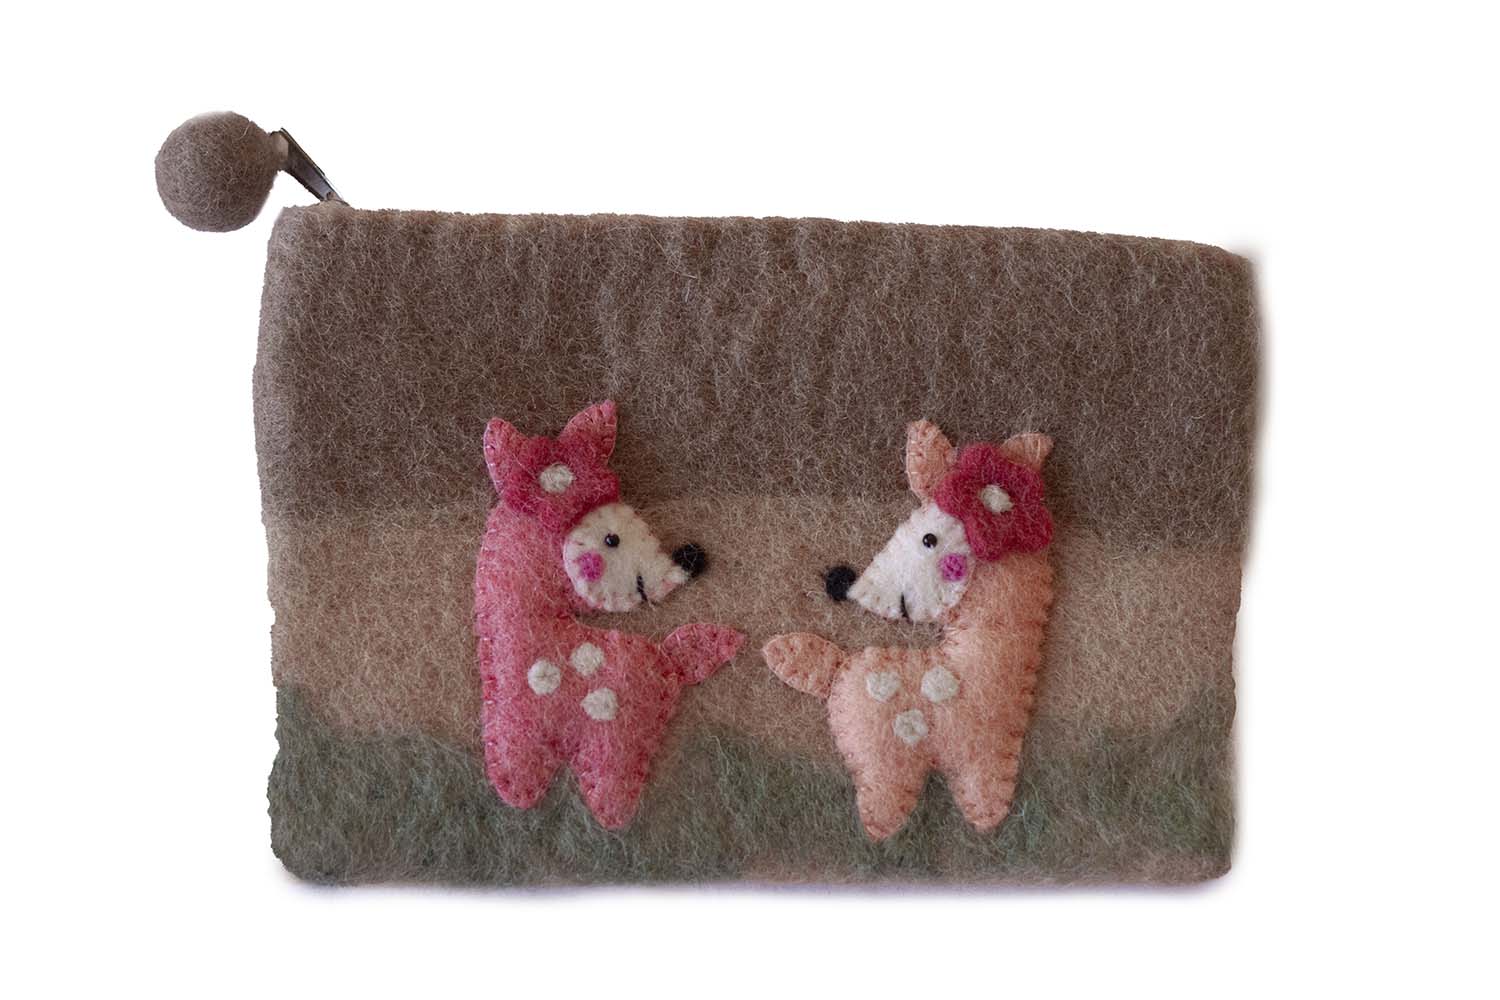 This Global Groove Life, handmade, ethical, fair trade, eco-friendly, sustainable, green felt zipper coin pouch was created by artisans in Kathmandu Nepal and is adorned with an adorable fawn deer motif.